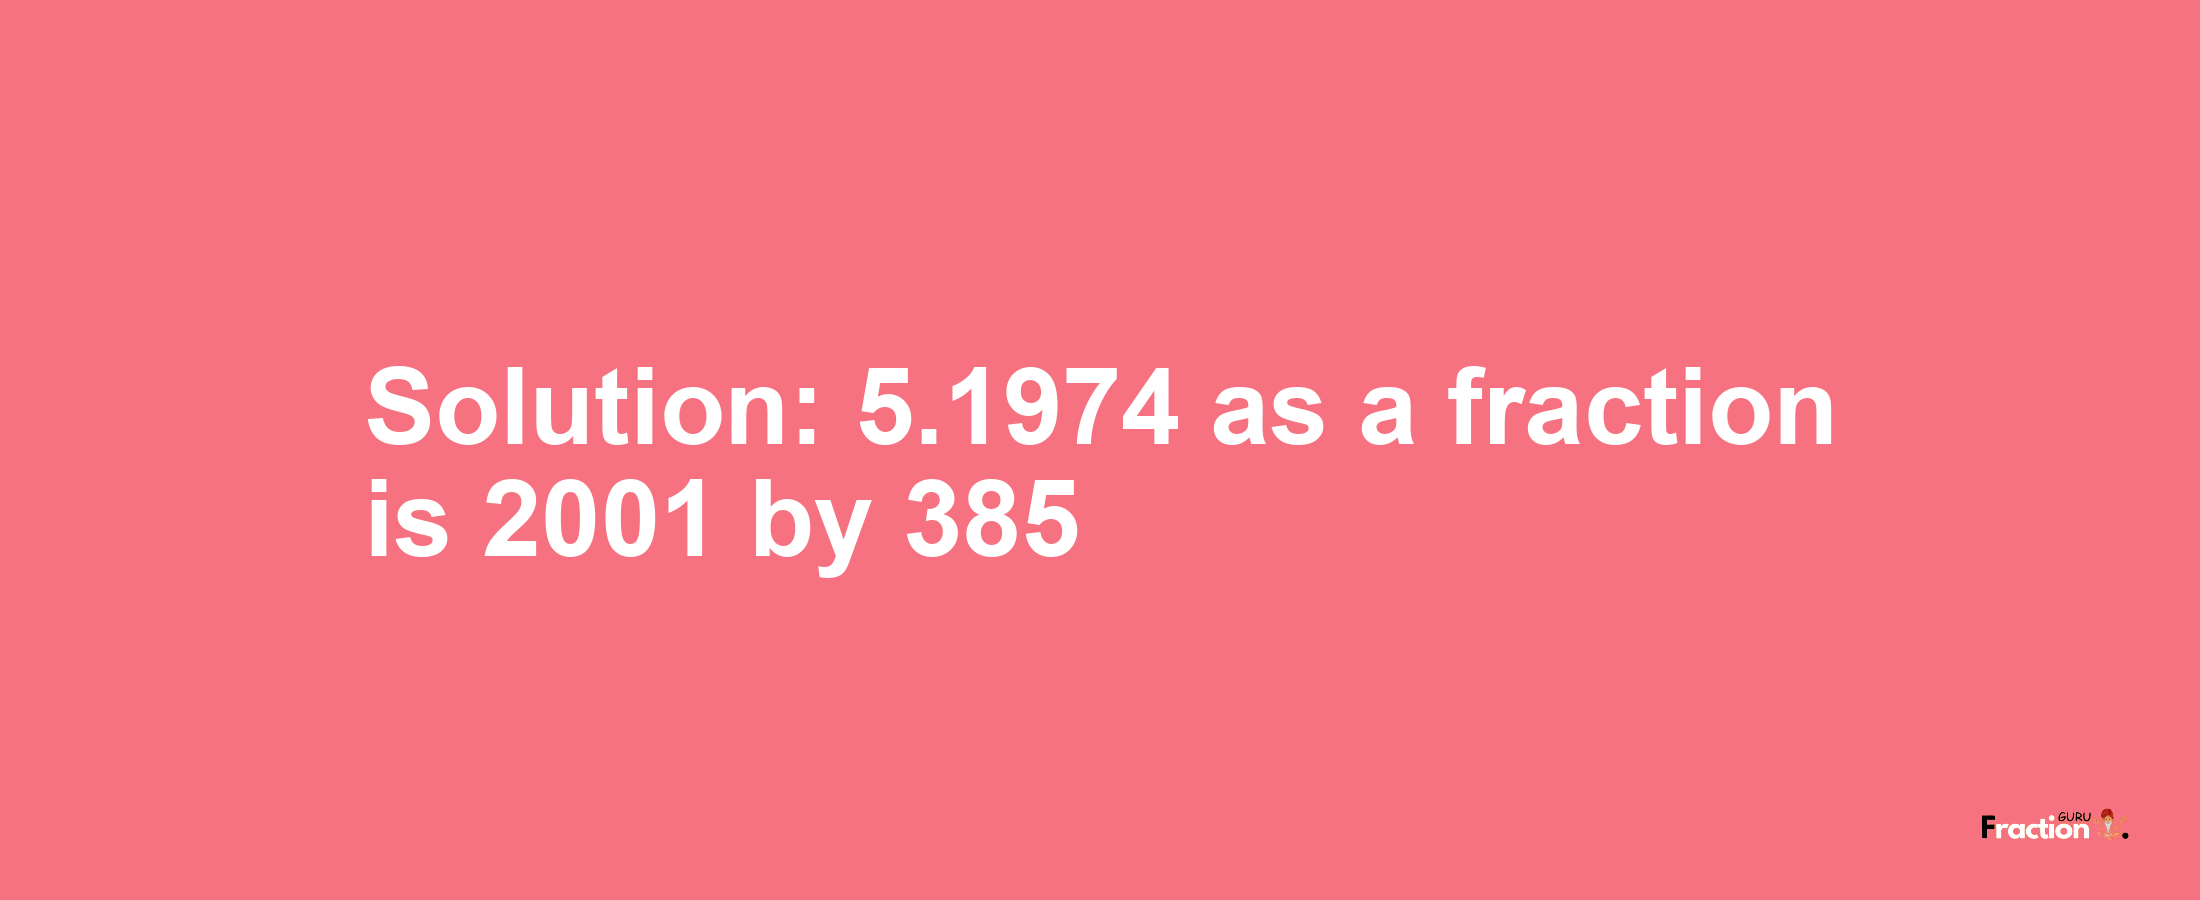 Solution:5.1974 as a fraction is 2001/385